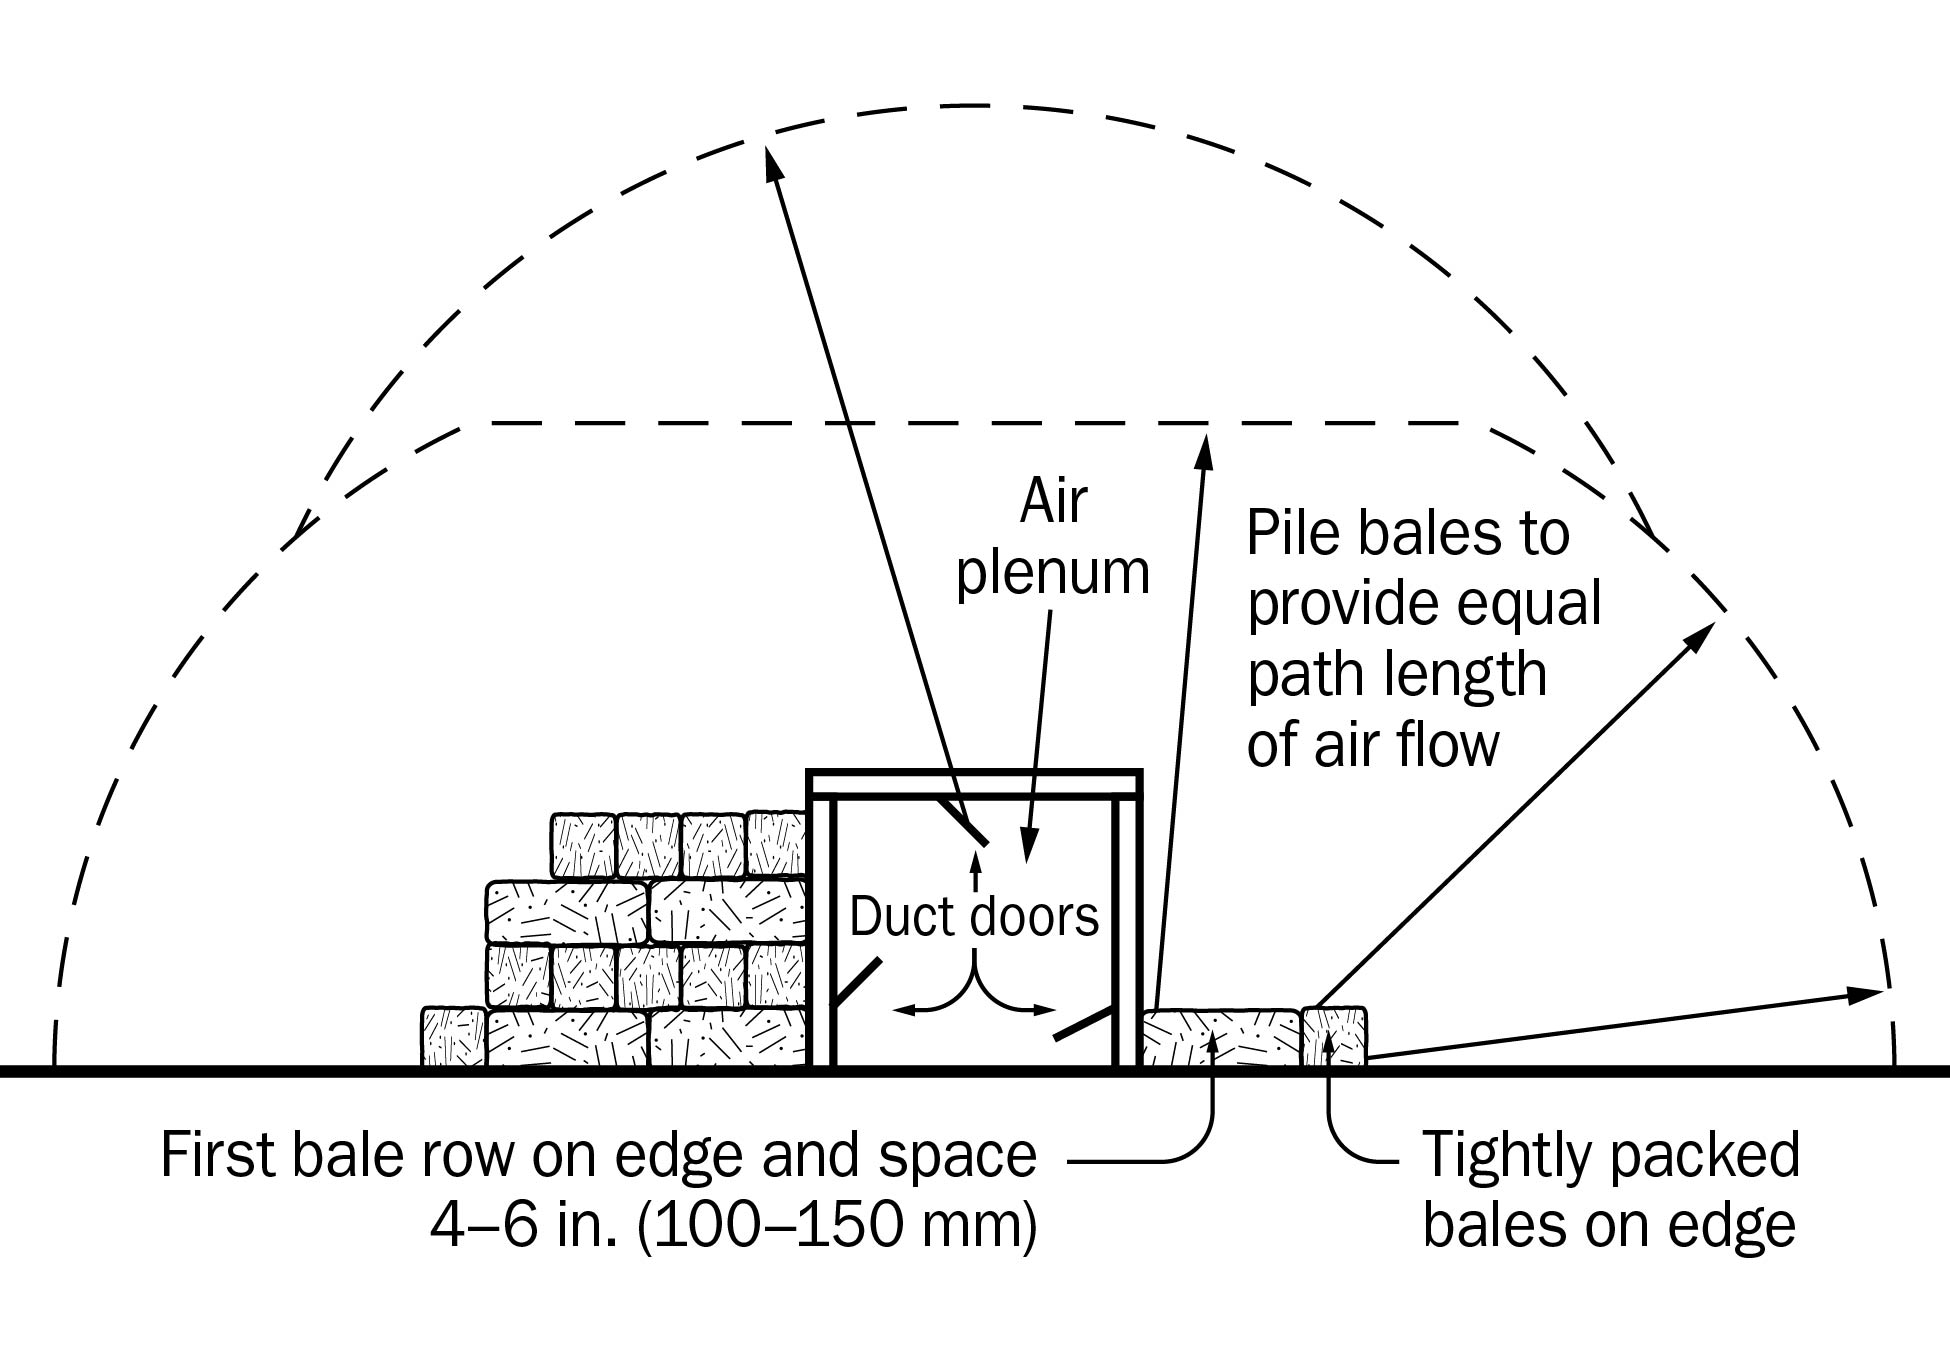 Layout of the air duct and the slatted floor with arrows showing the air movement out of the duct and through the hay mow